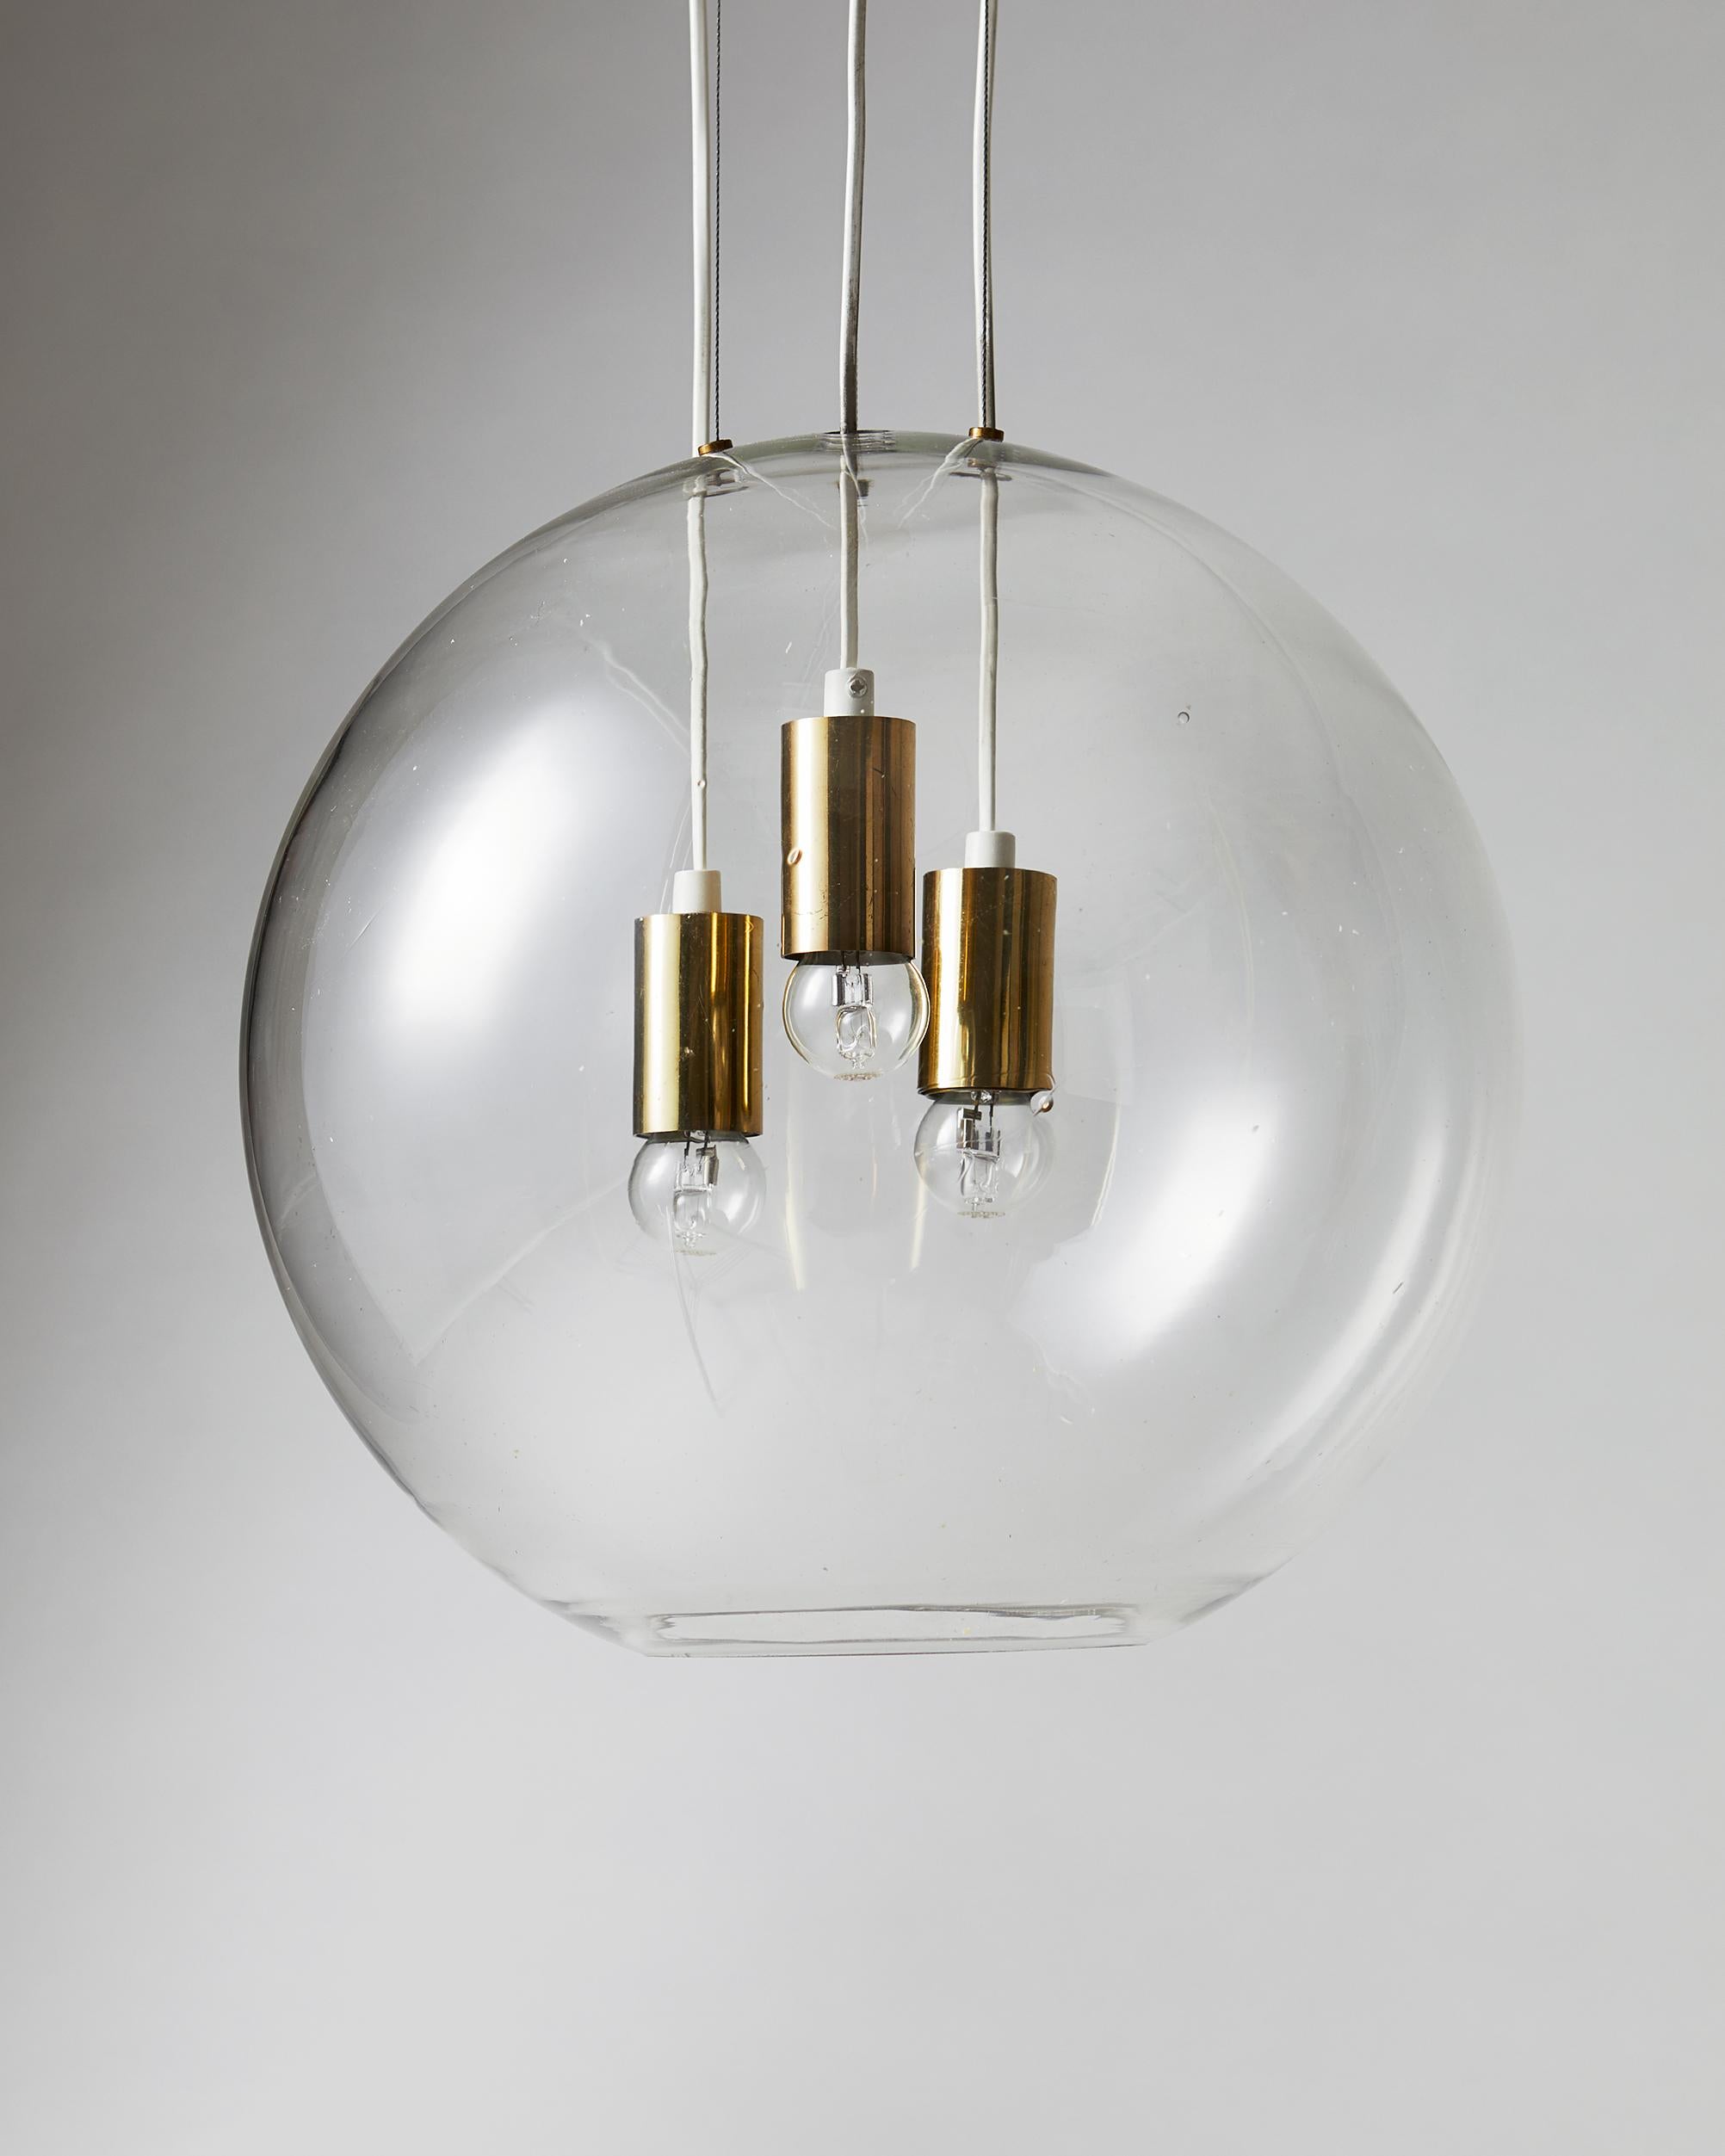 Modern Ceiling Lamp, Designed by AOS 'Ahlgren, Olsson and Silow' for Axel Anell